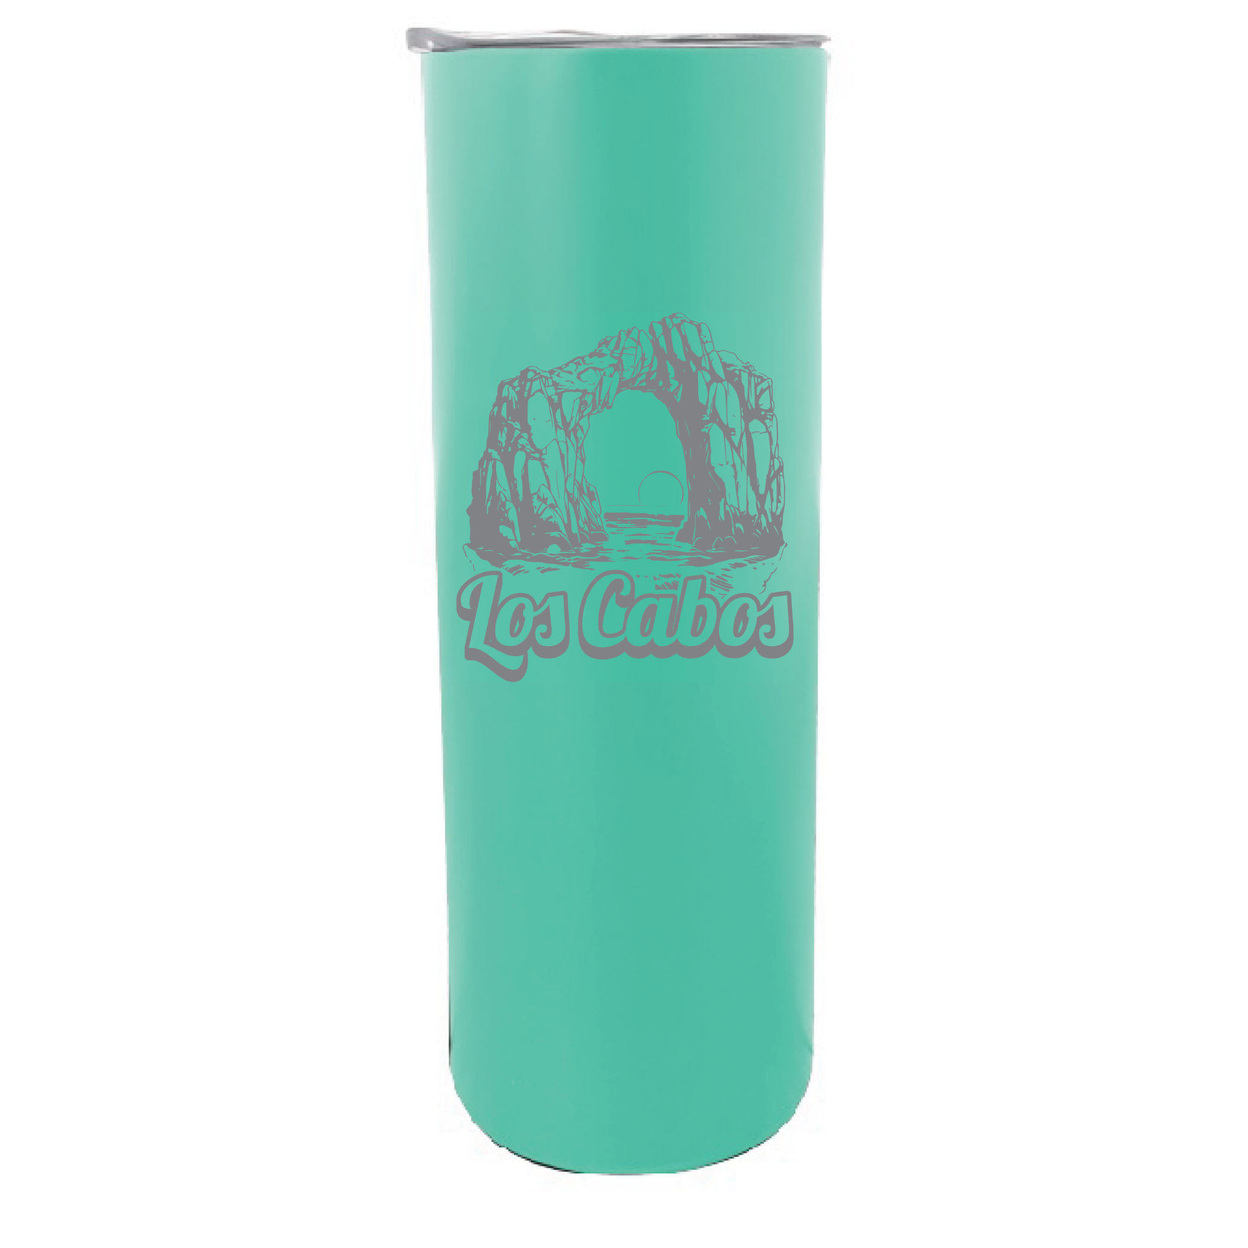 Los Cabos Mexico Souvenir 20 Oz Engraved Insulated Stainless Steel Skinny Tumbler - Seafoam,,4-Pack